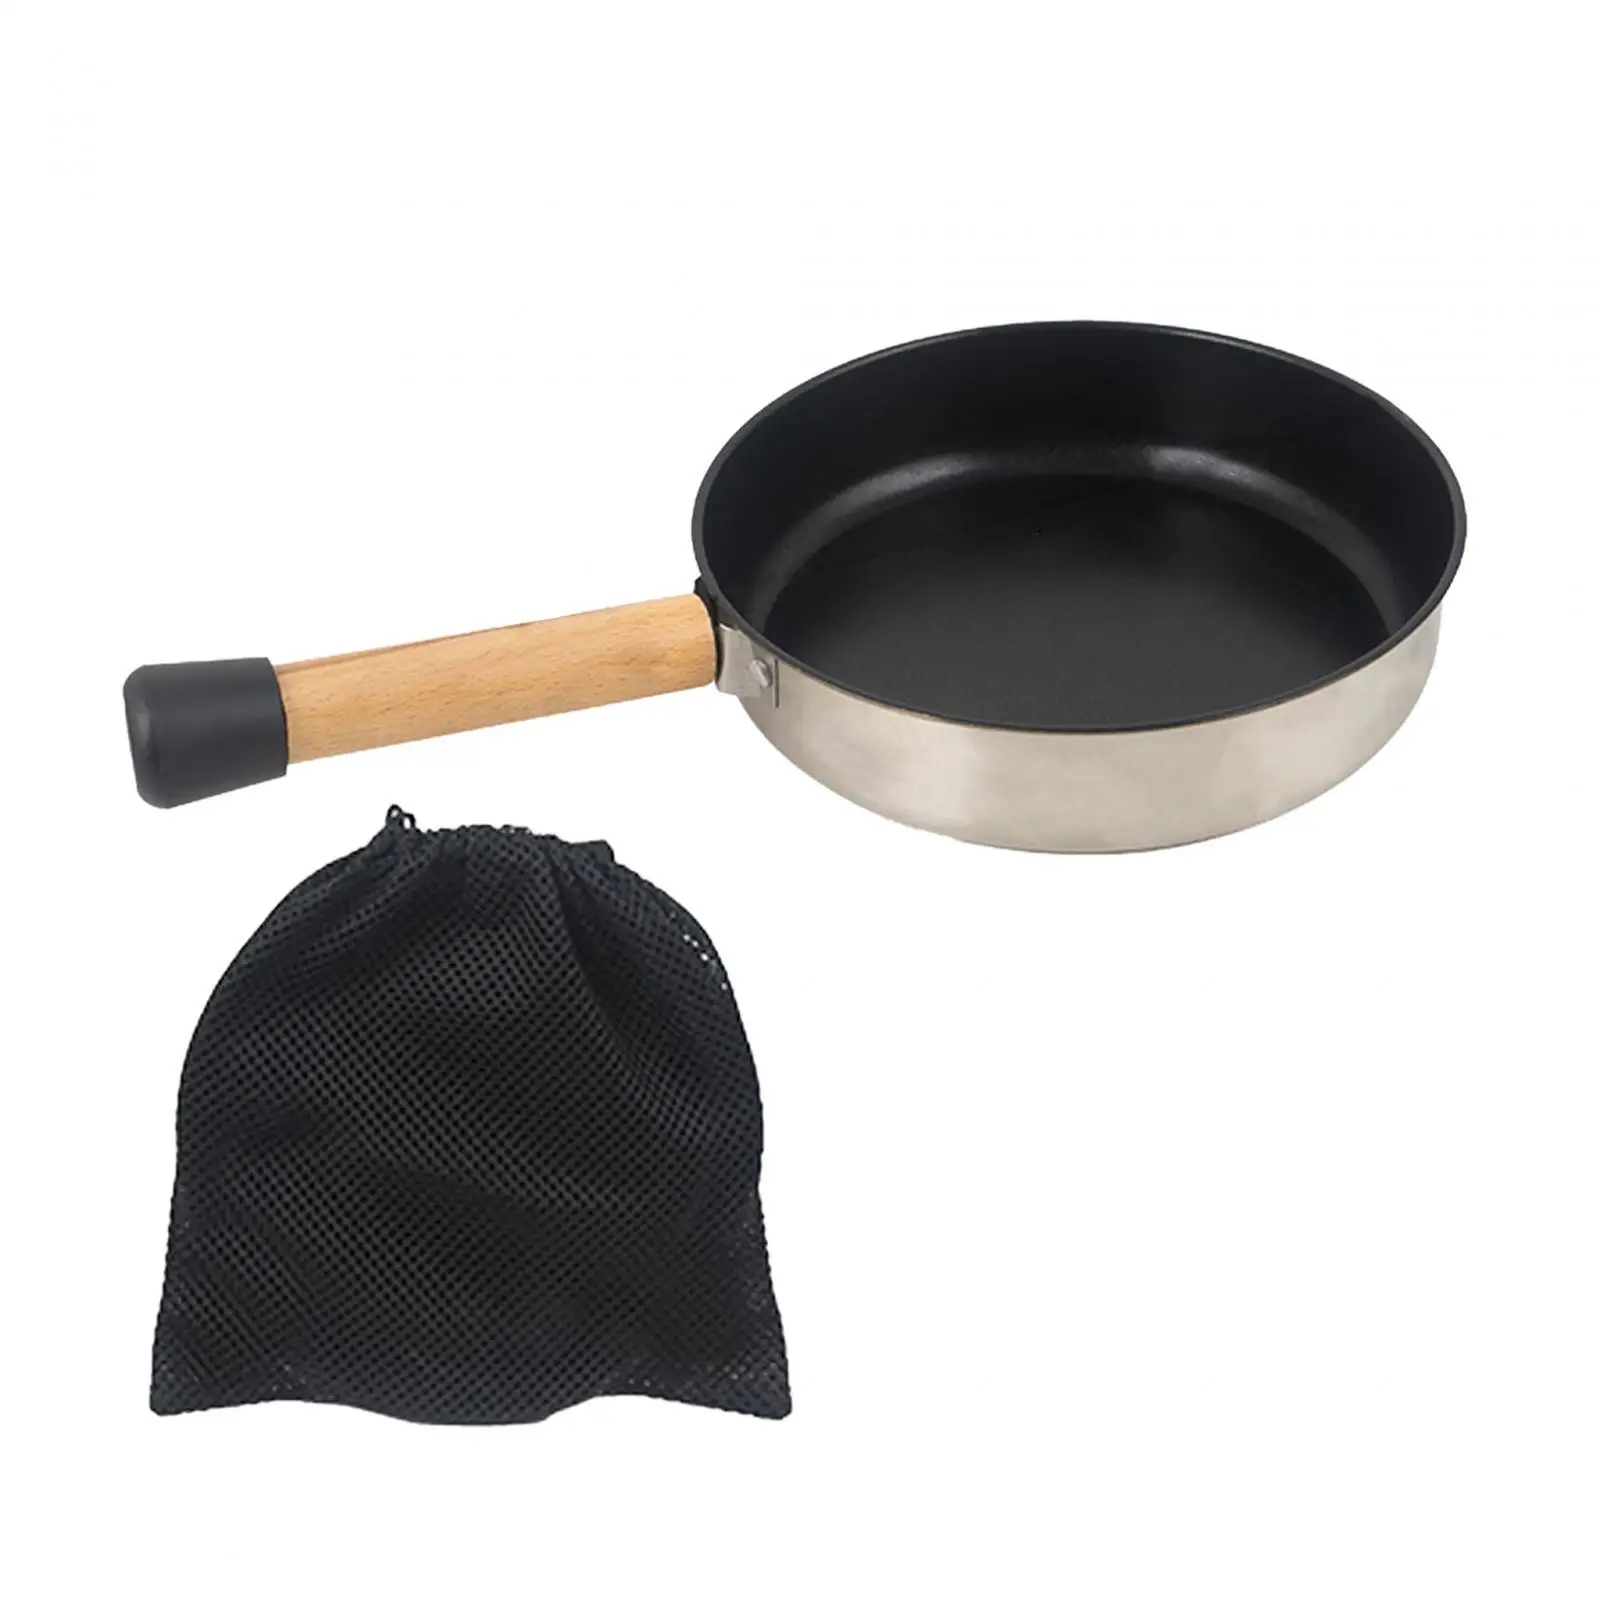 Non Stick Frying Pan Kitchen Cookware Tableware Equipment with Wooden Handle for